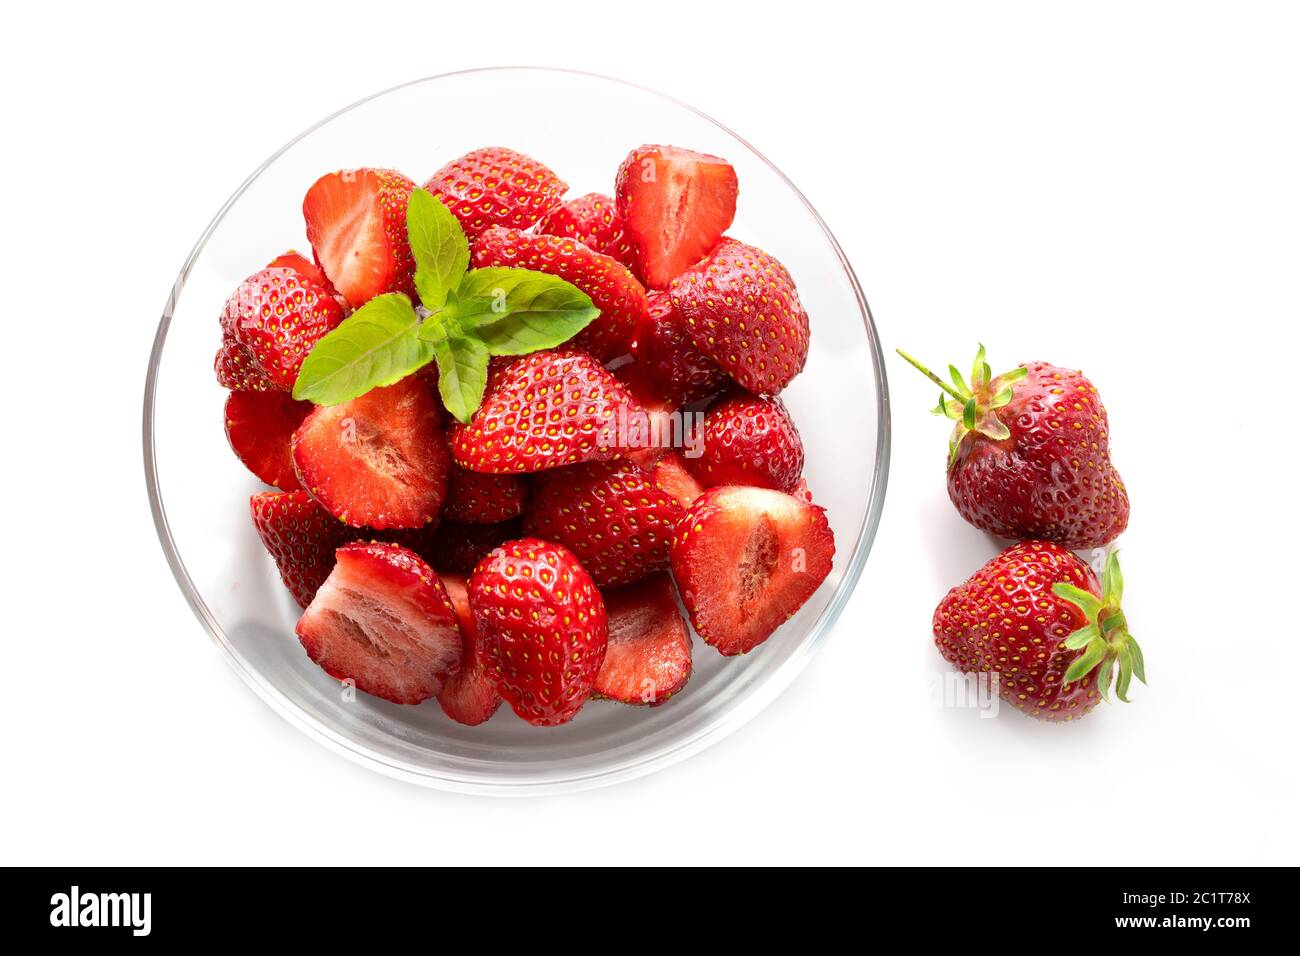 Dessert from fresh strawberries with peppermint garnish in a glass bowl, isolated with shadows on a white background, high angle view from above Stock Photo